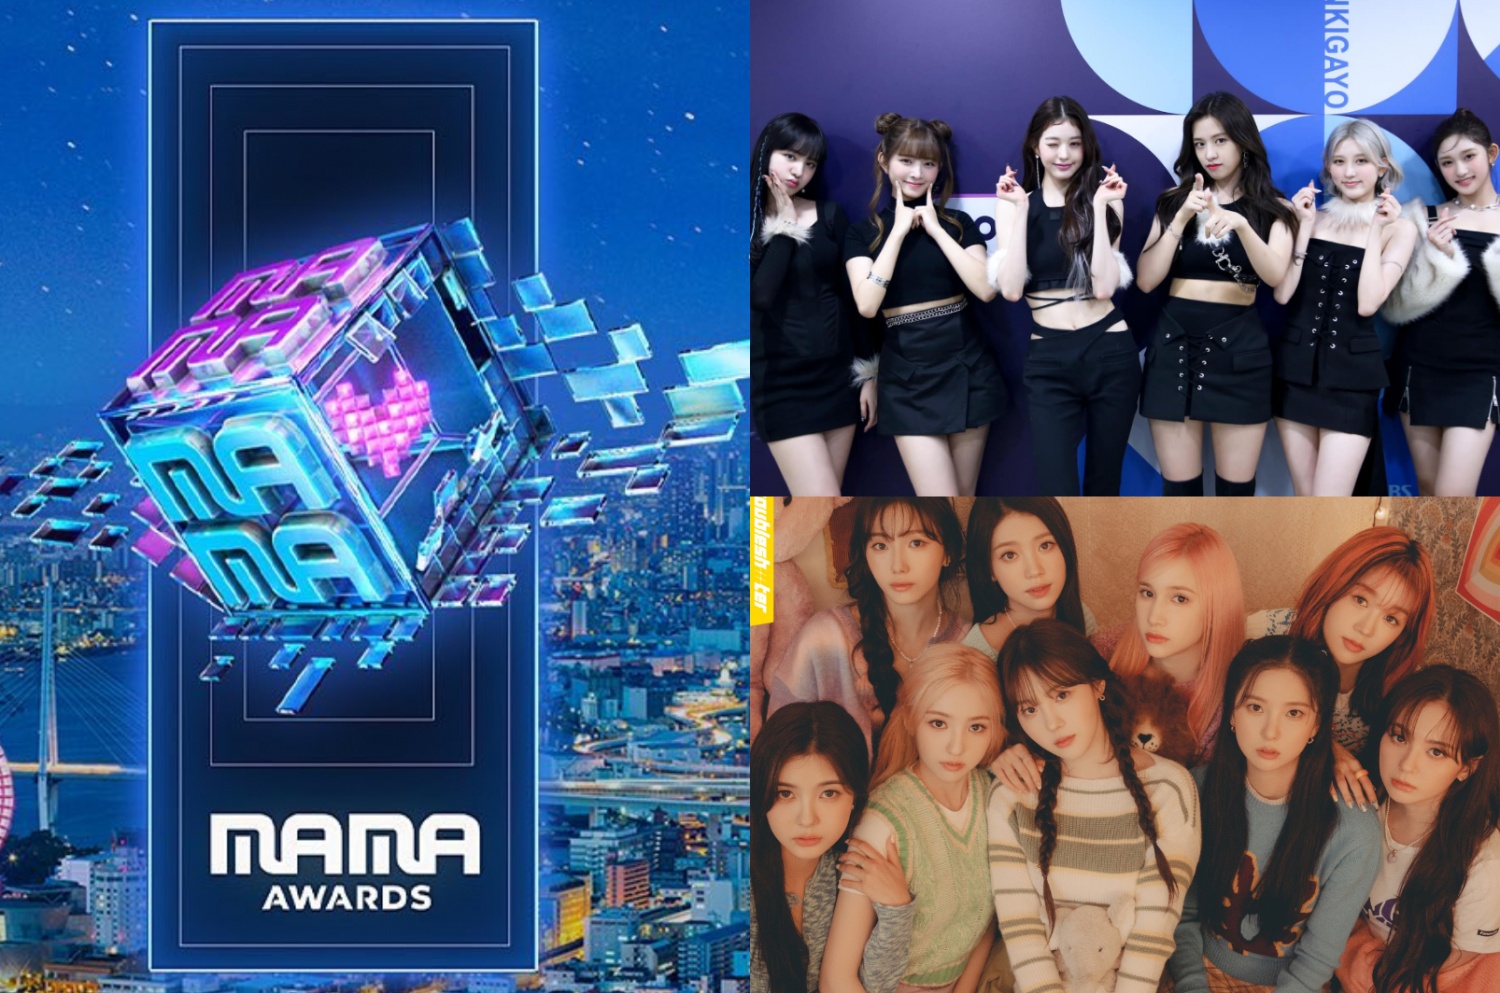 2022 MAMA Awards Issues Statement On unfair voting in connection with suspected rigging